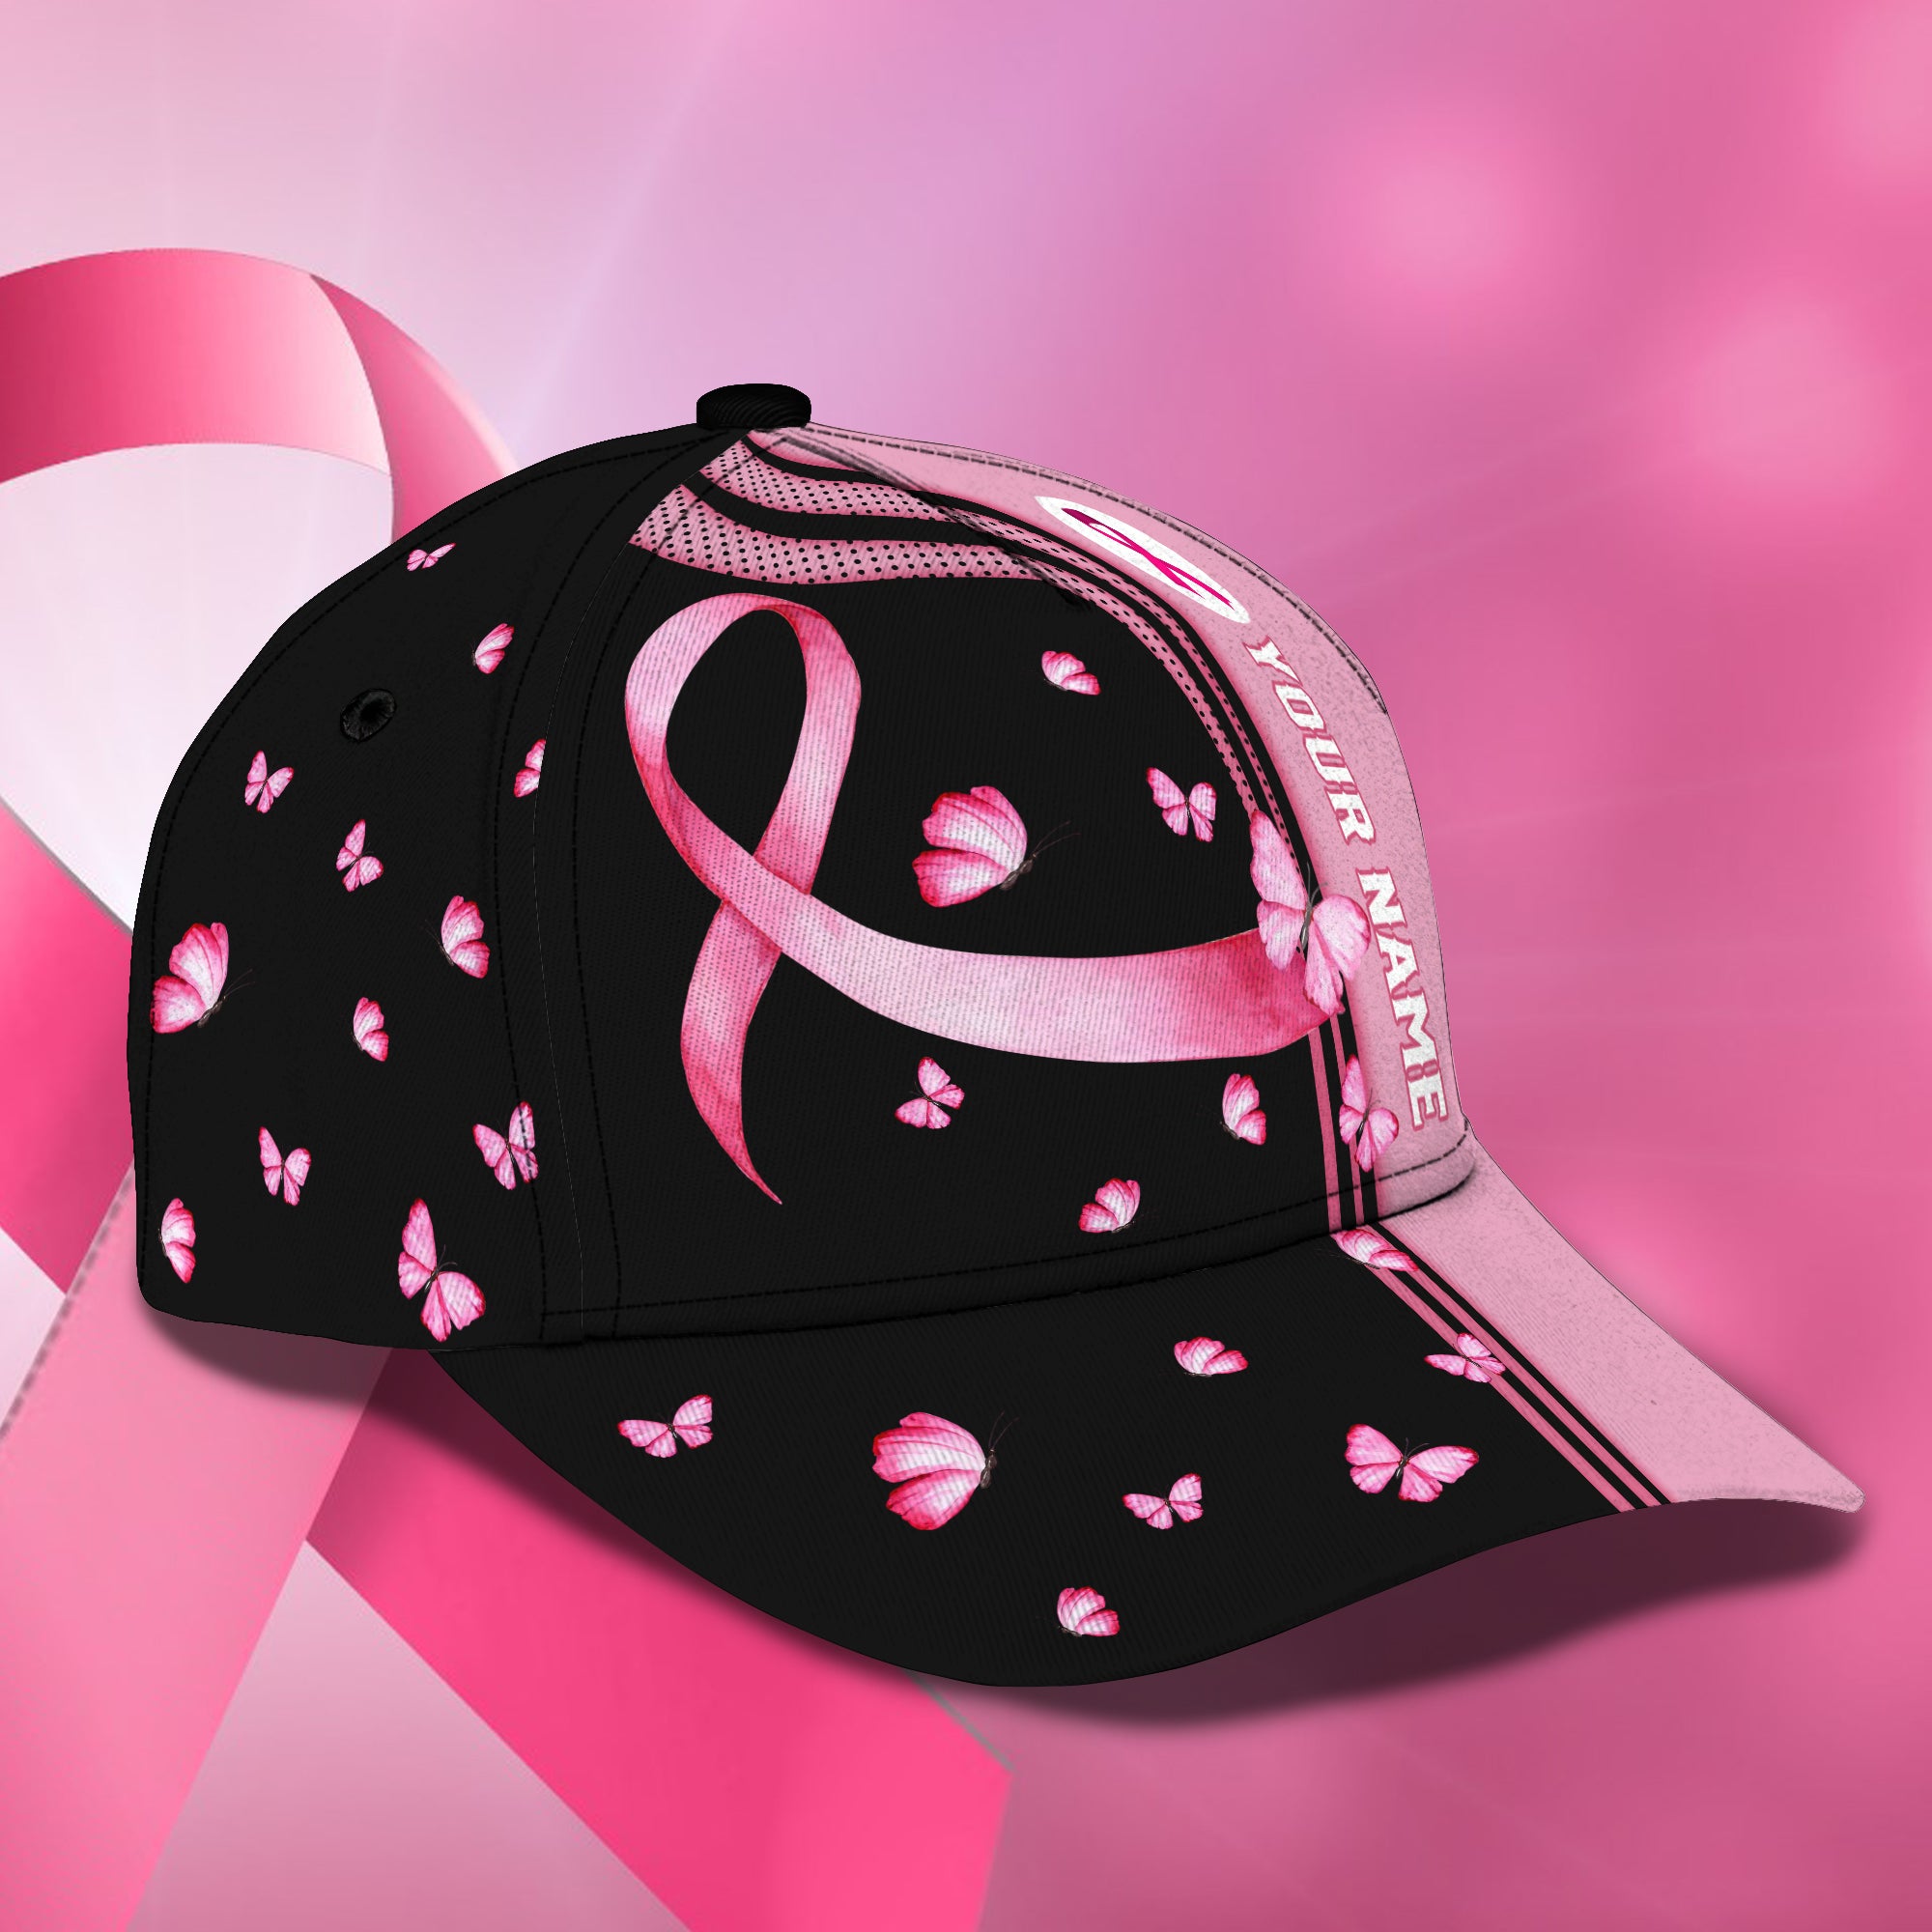 Believe-Breast Cancer Awareness - Personalized Name Cap - Lta98-57